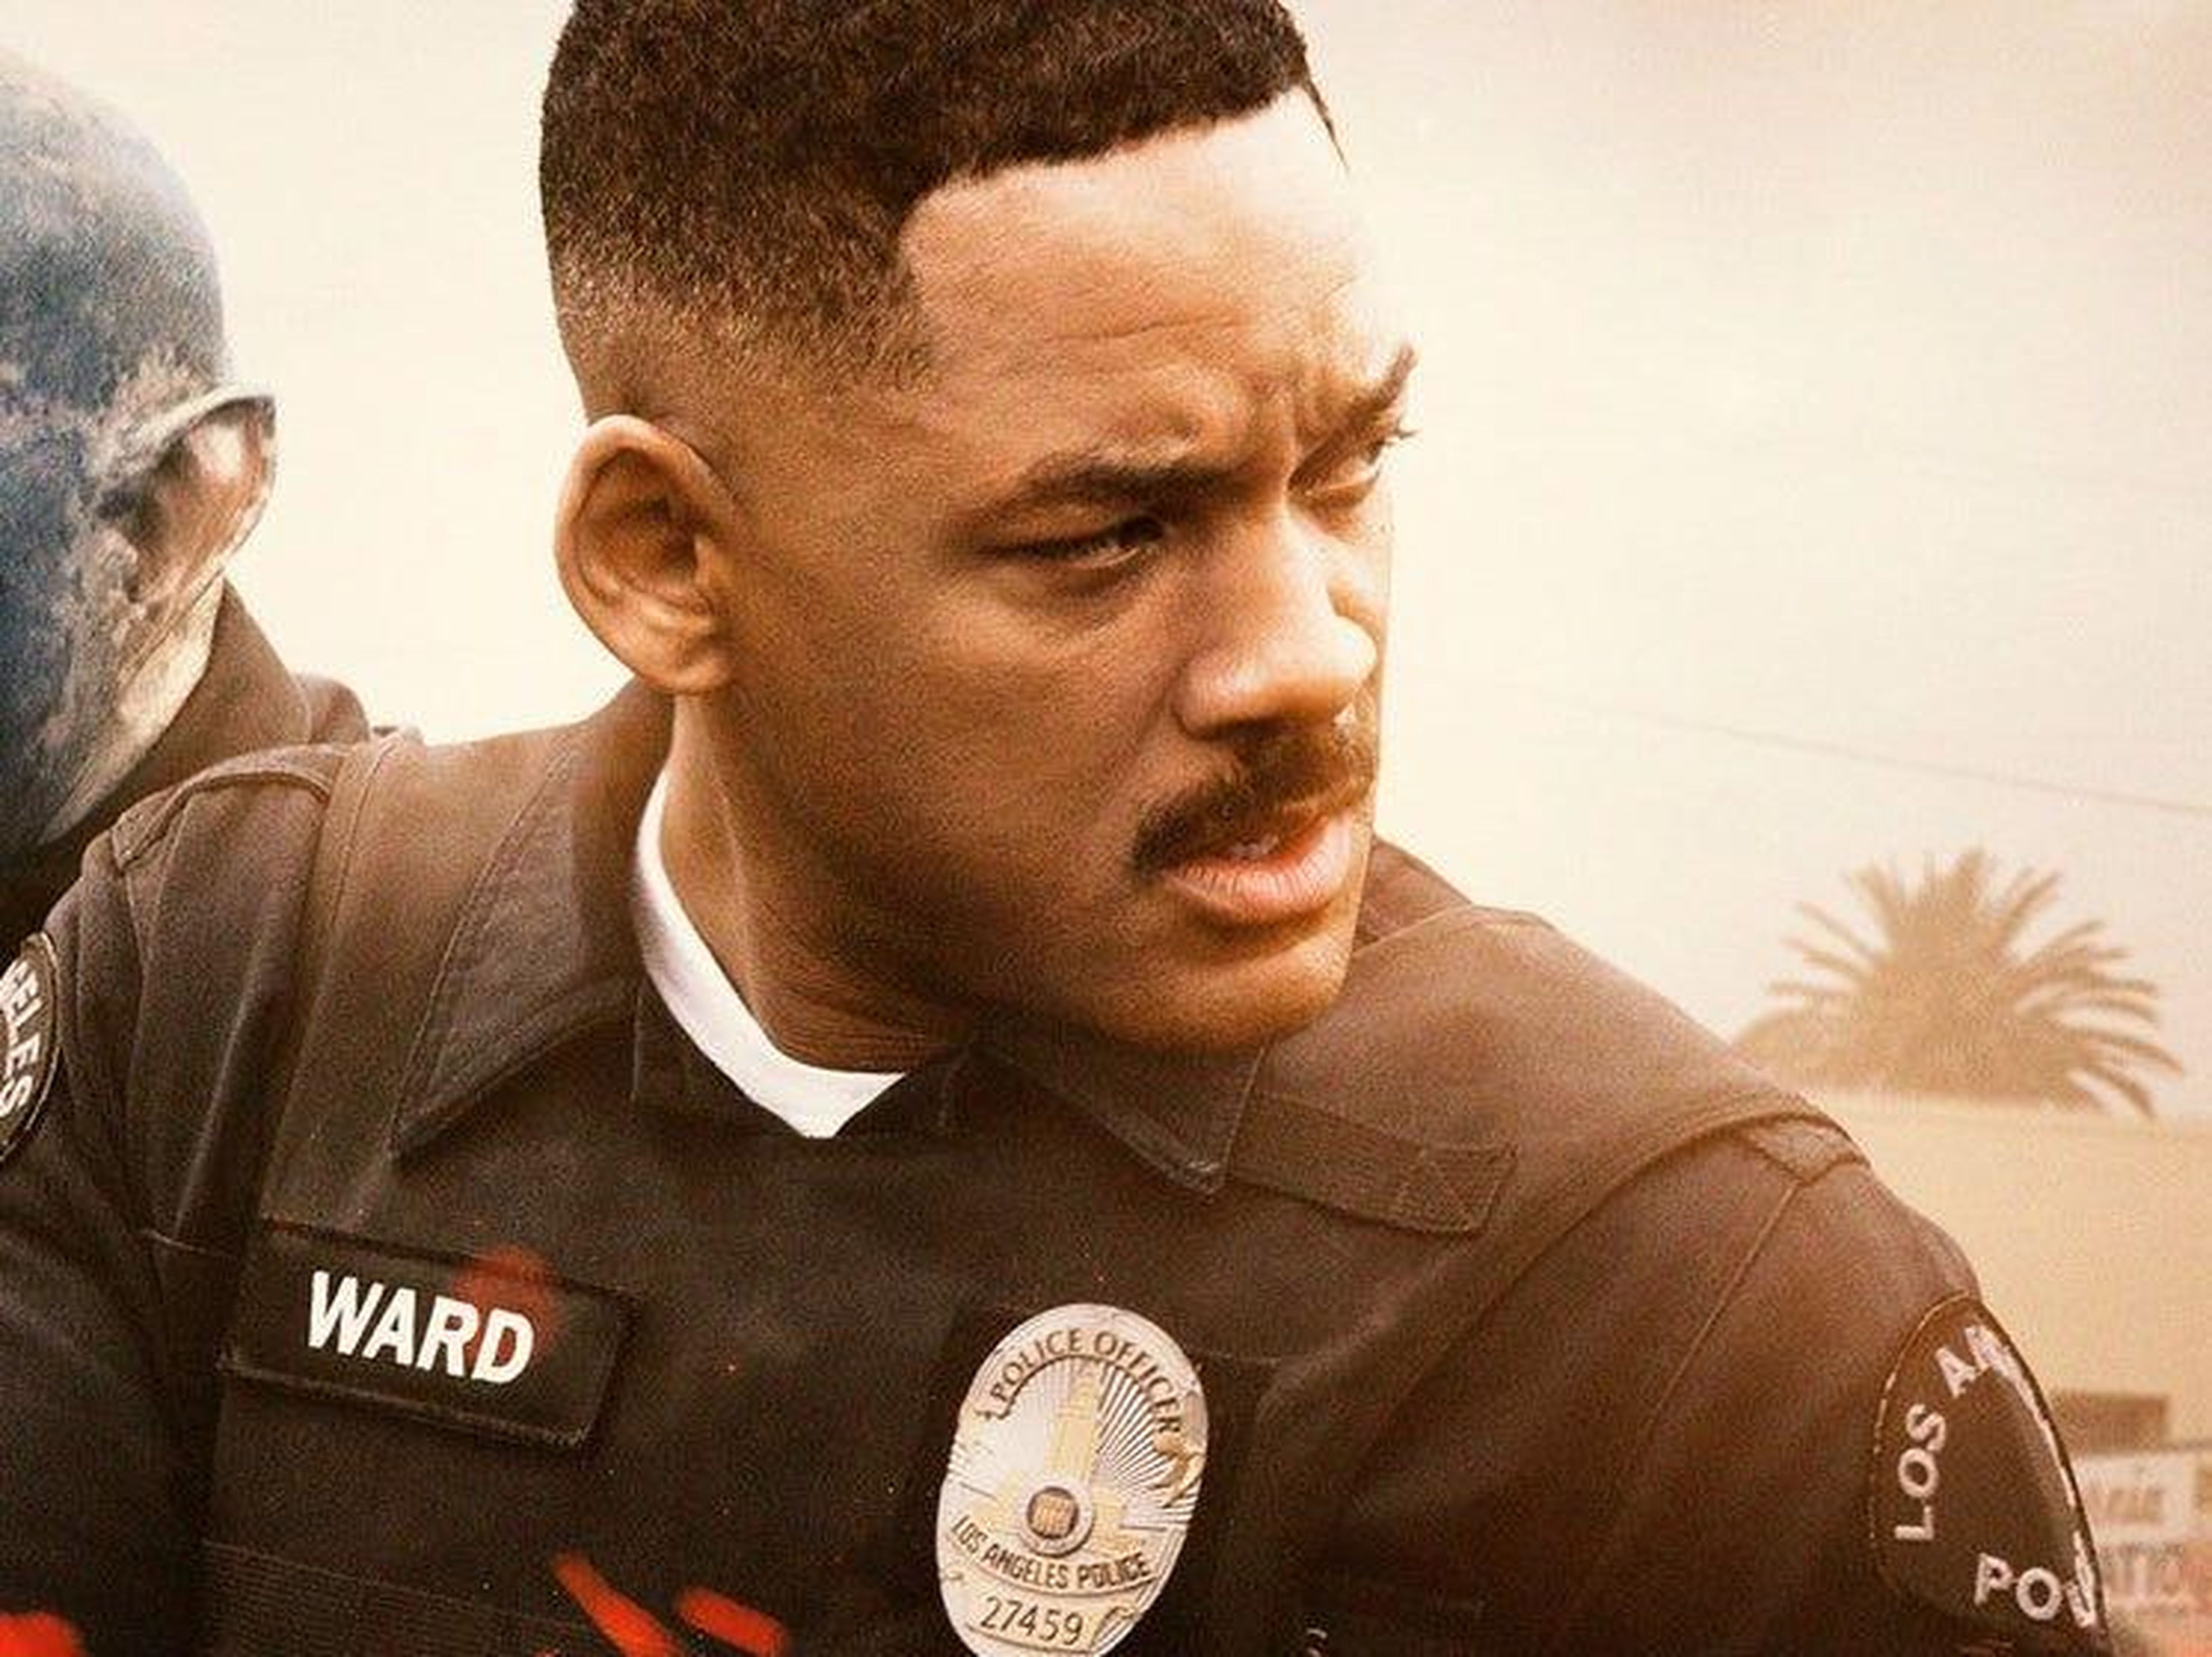 15. Will Smith as Daryl Ward in the "Bright" sequel